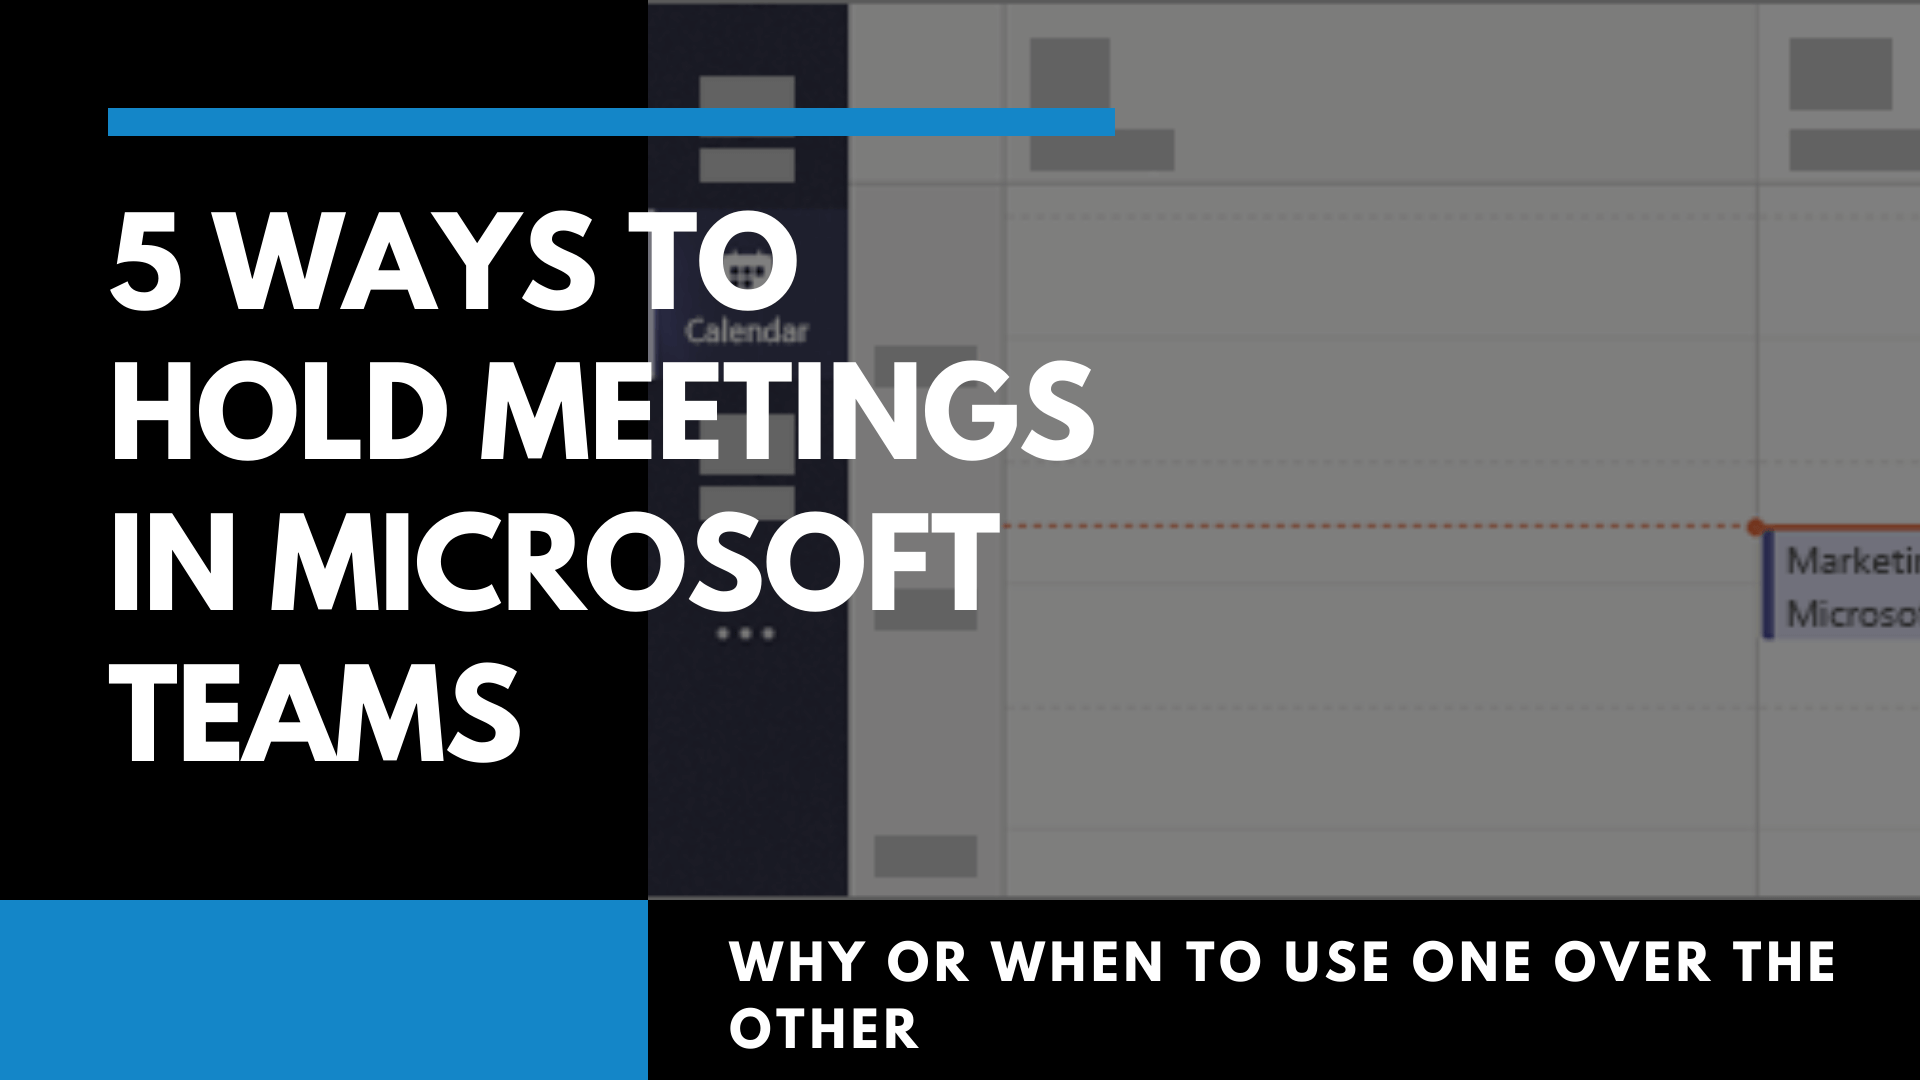 Graphic saying, "5 Ways to Hold Meetings in Microsoft Teams"